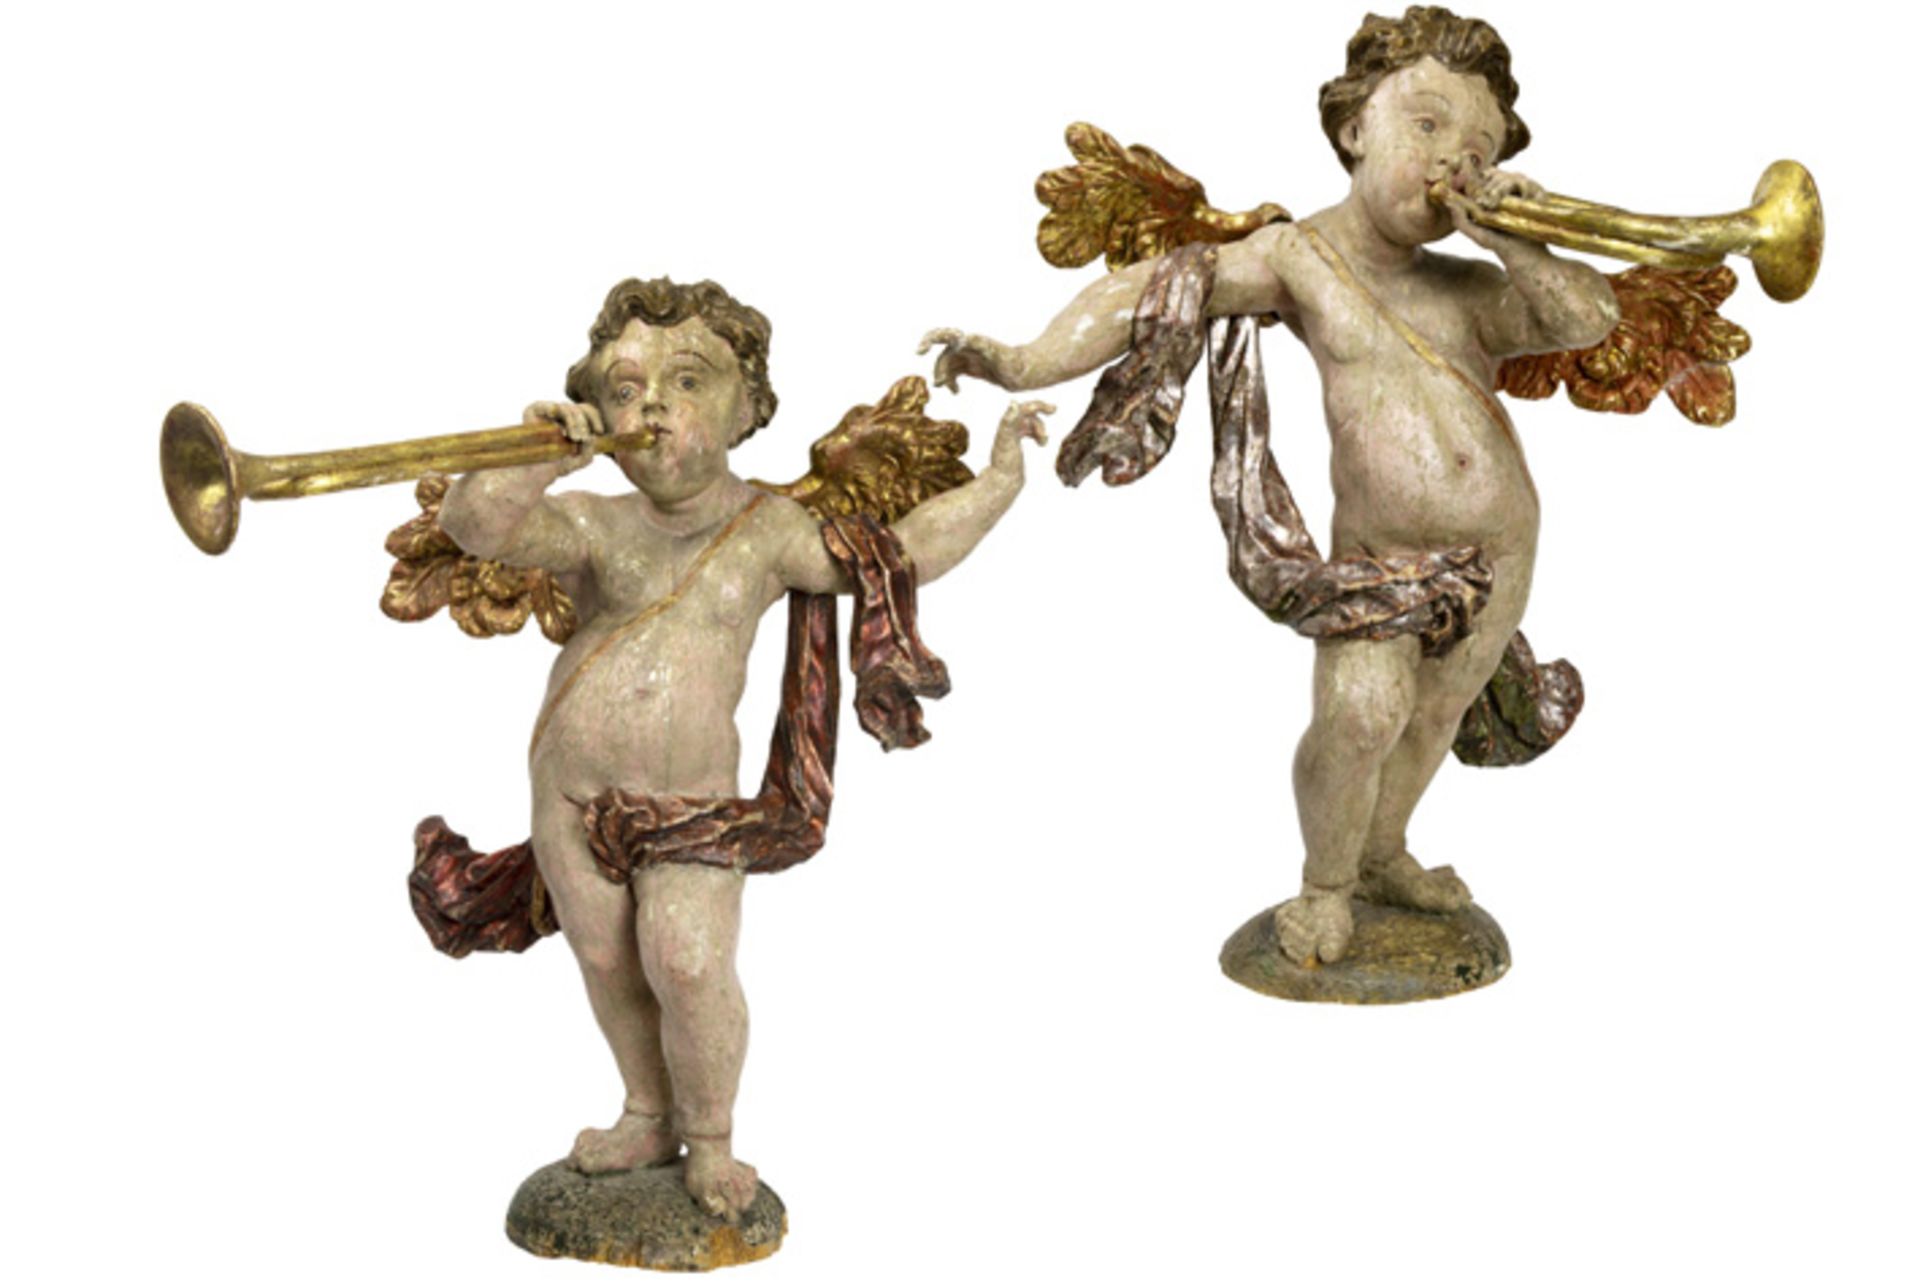 pair of 17th Cent. European baroque style sculptures in polychromed wood and with a quite rare